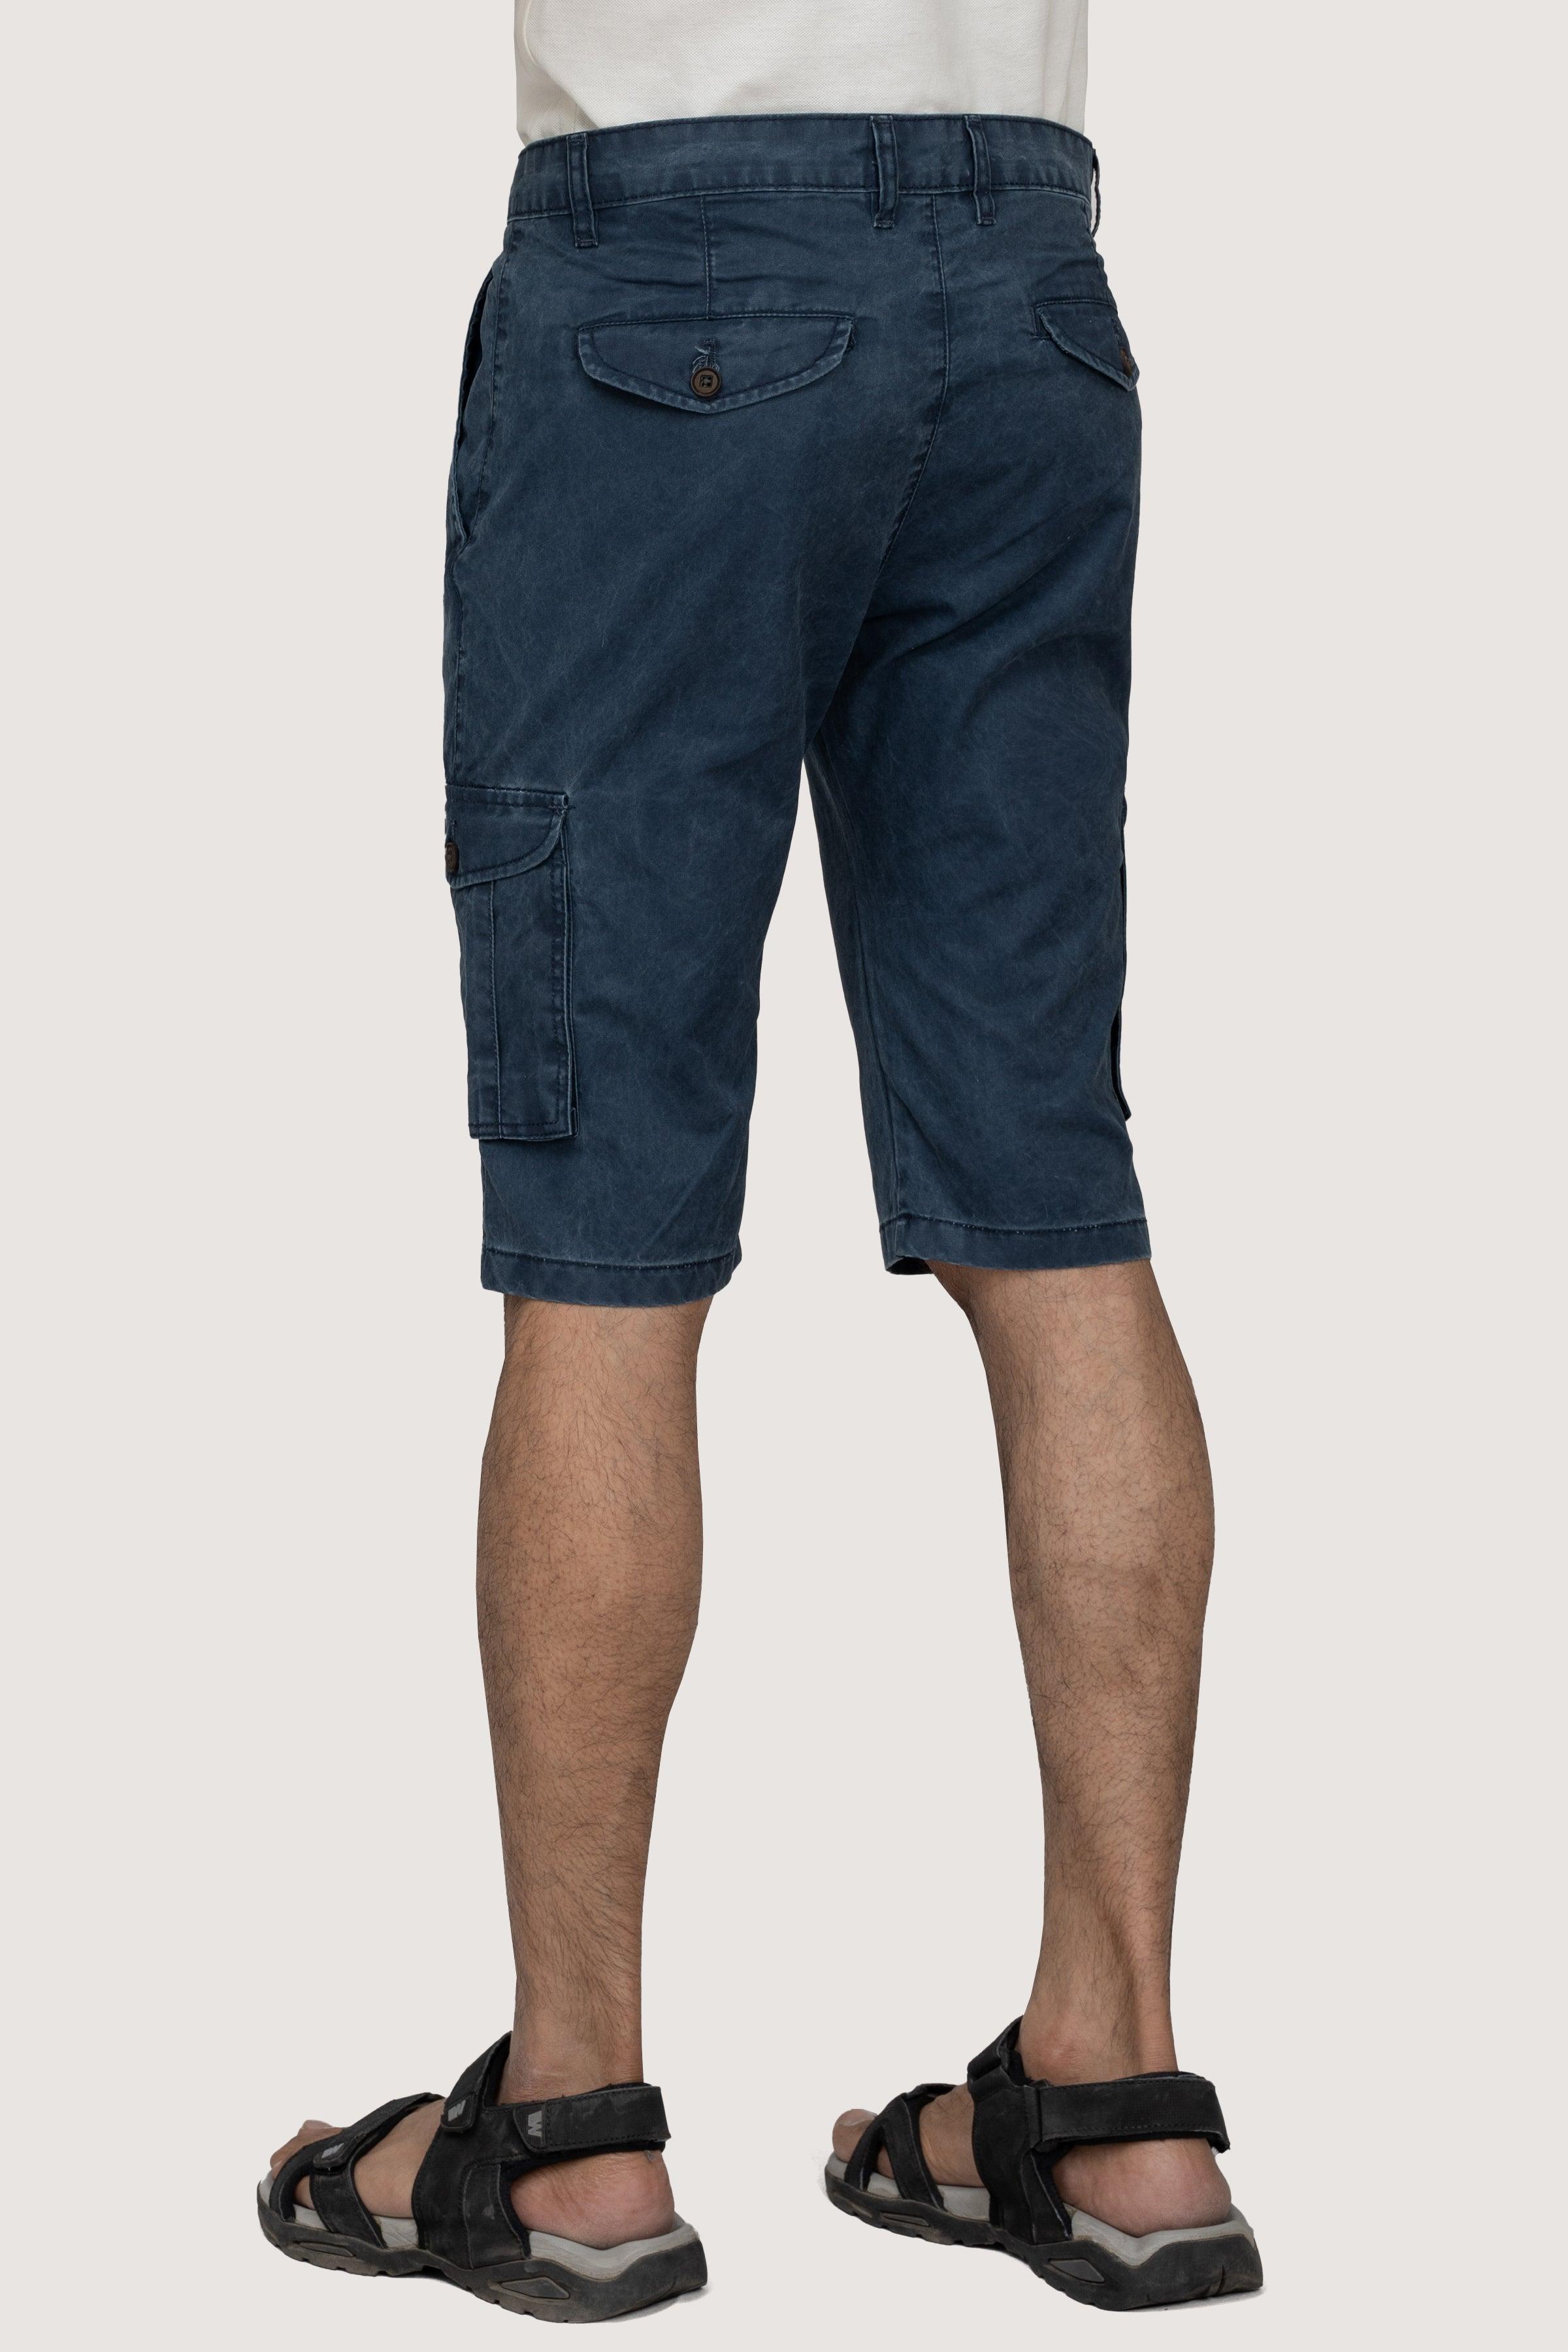 CARGO ENZYME WASHED REGULAR FIT NAVY SHORTS at Charcoal Clothing